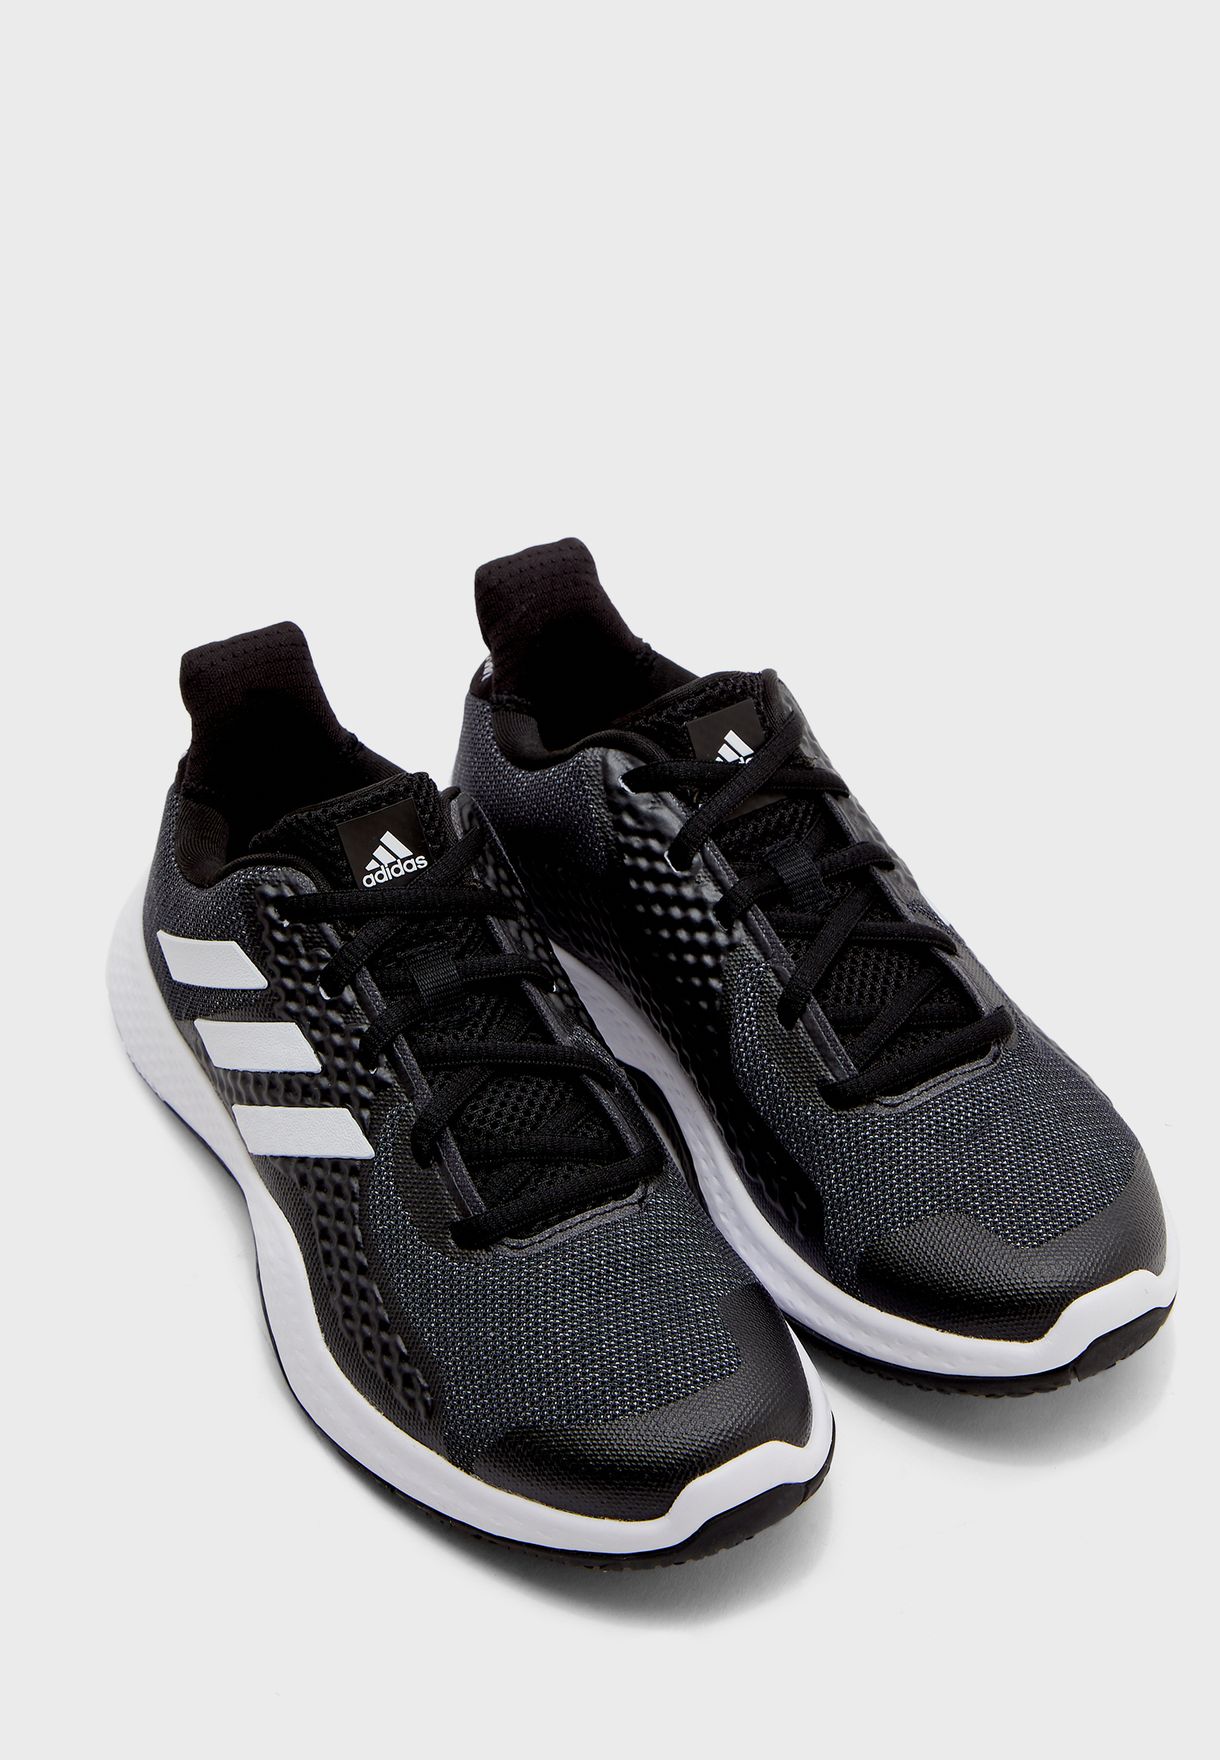 fitbounce adidas